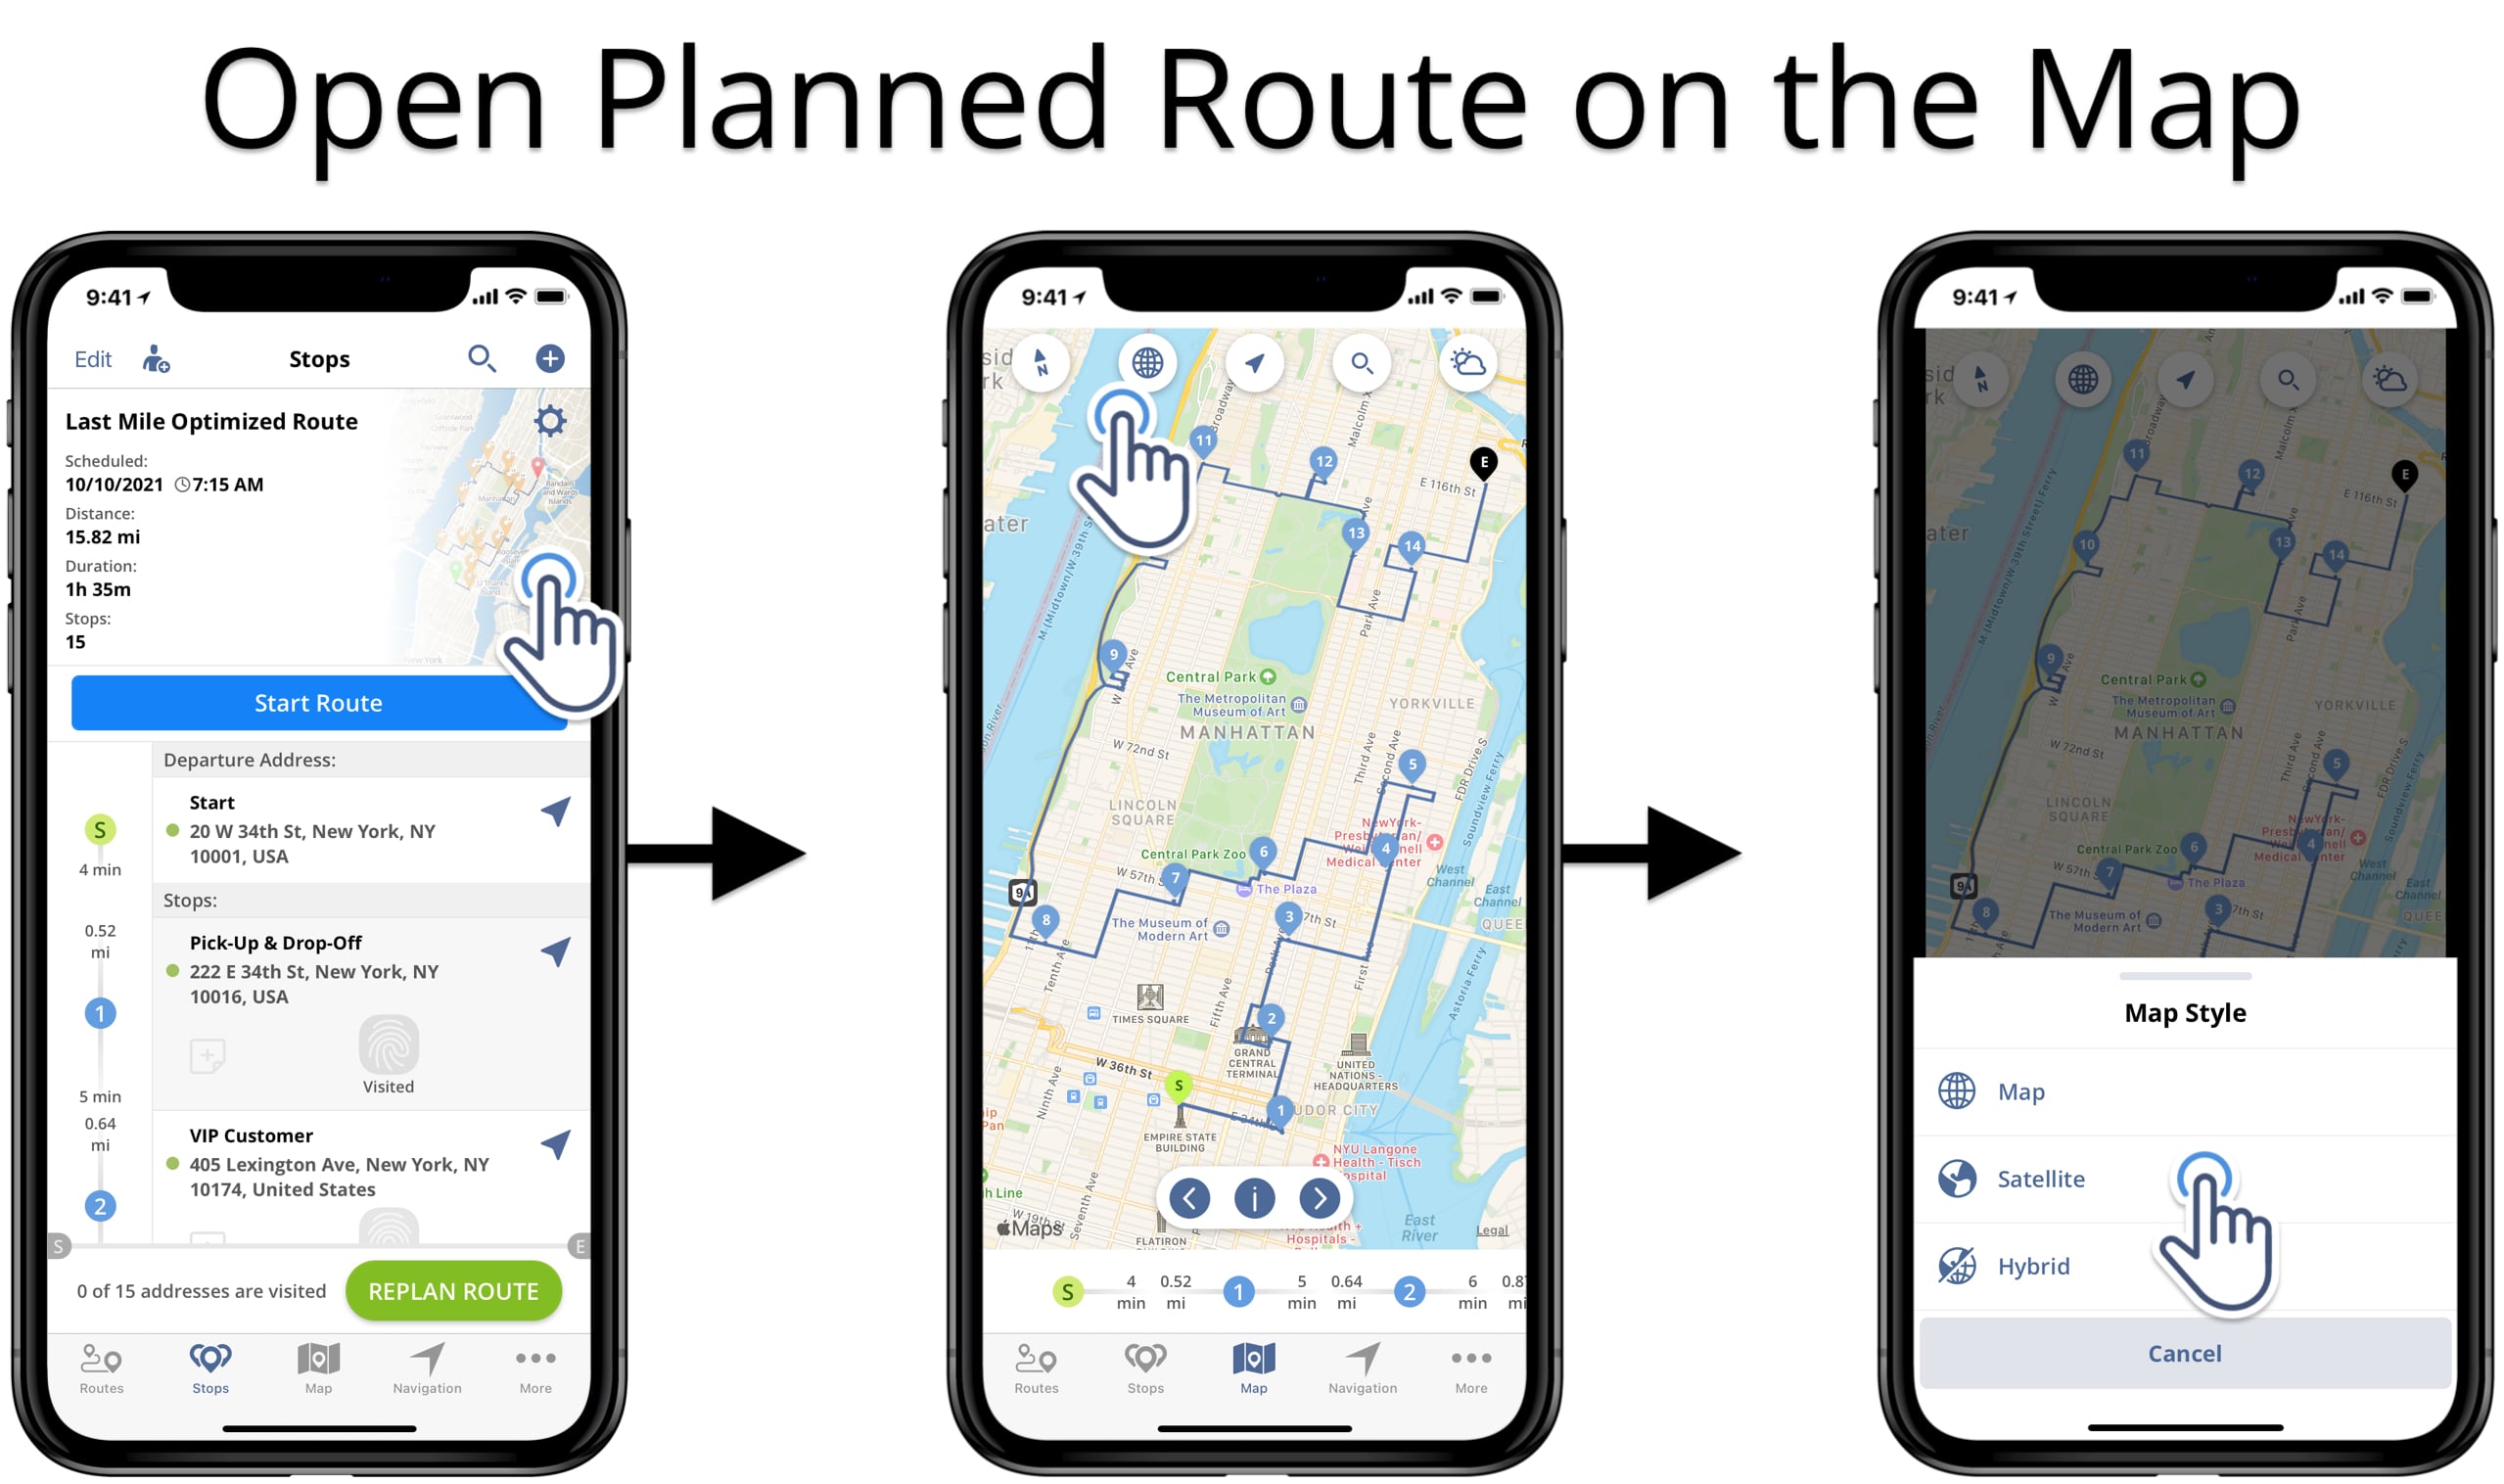 Open the planned and optimized route on the Route4Me Route Planner map for iPhone and iPad.